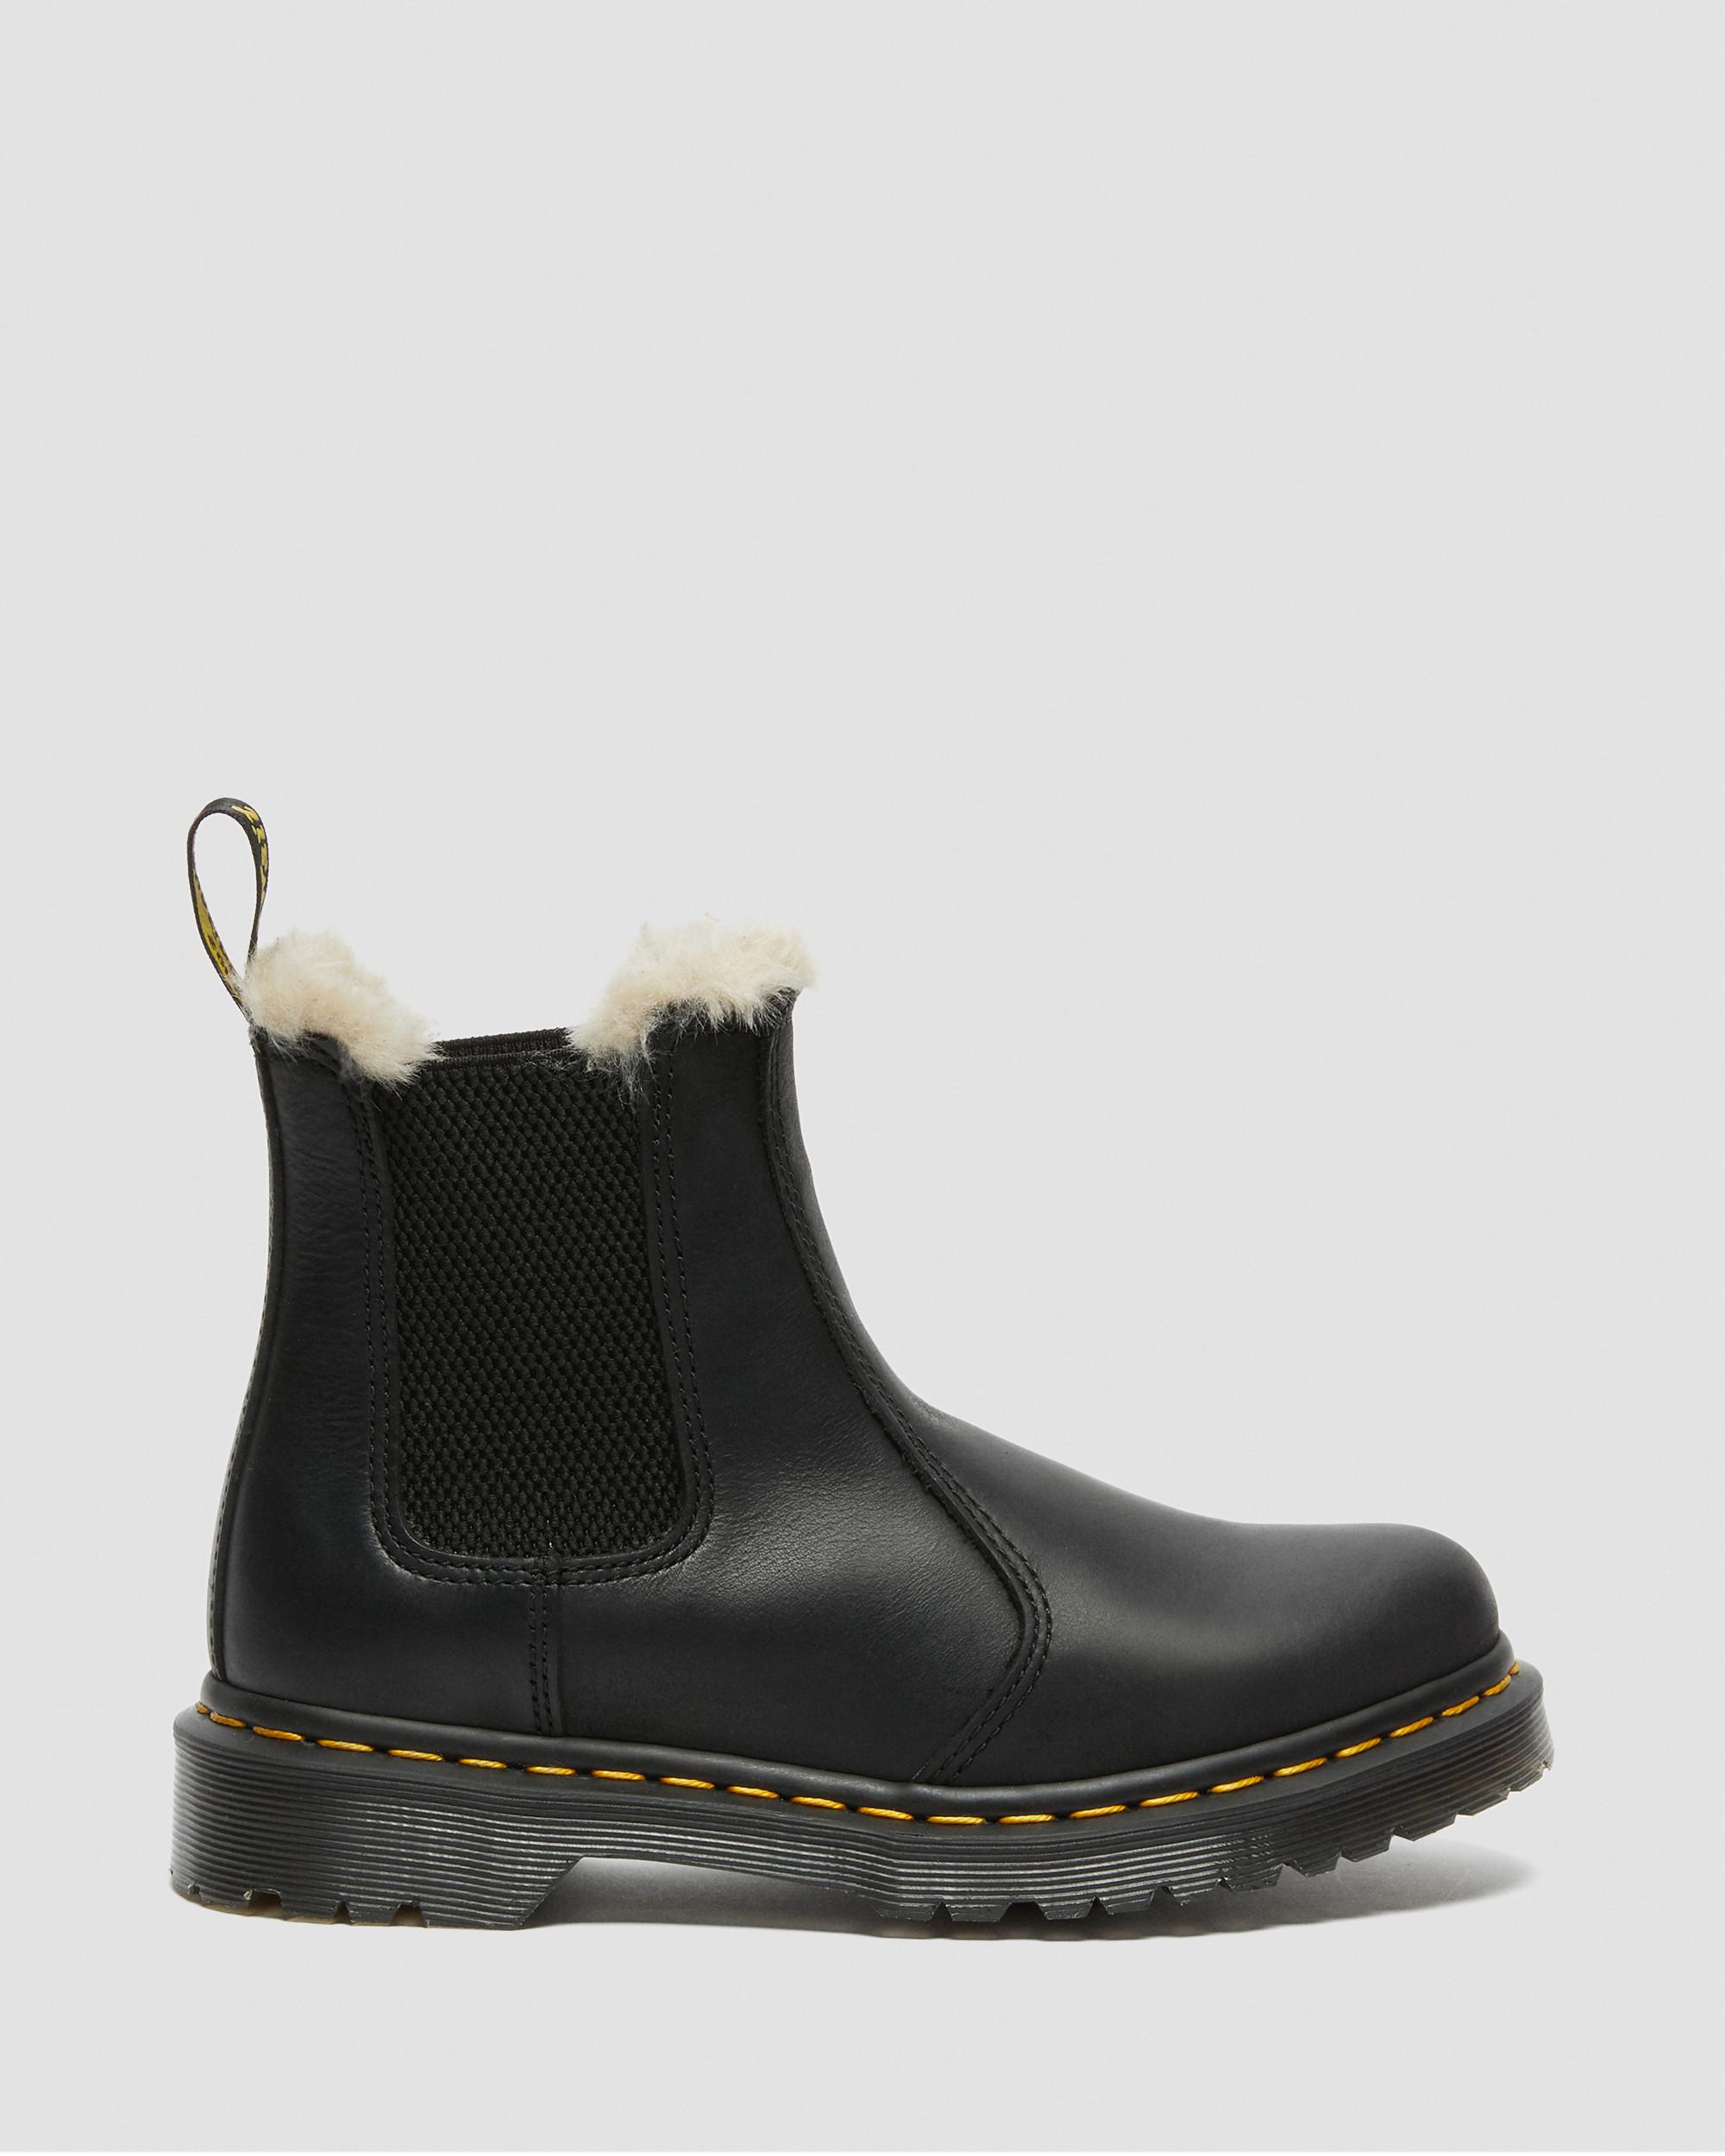 2976 Leonore Burnished Chelsea Boots mit Kunstfellfutter2976 Leonore Chelsea Boots Mit Kunstpelzfutter Dr. Martens